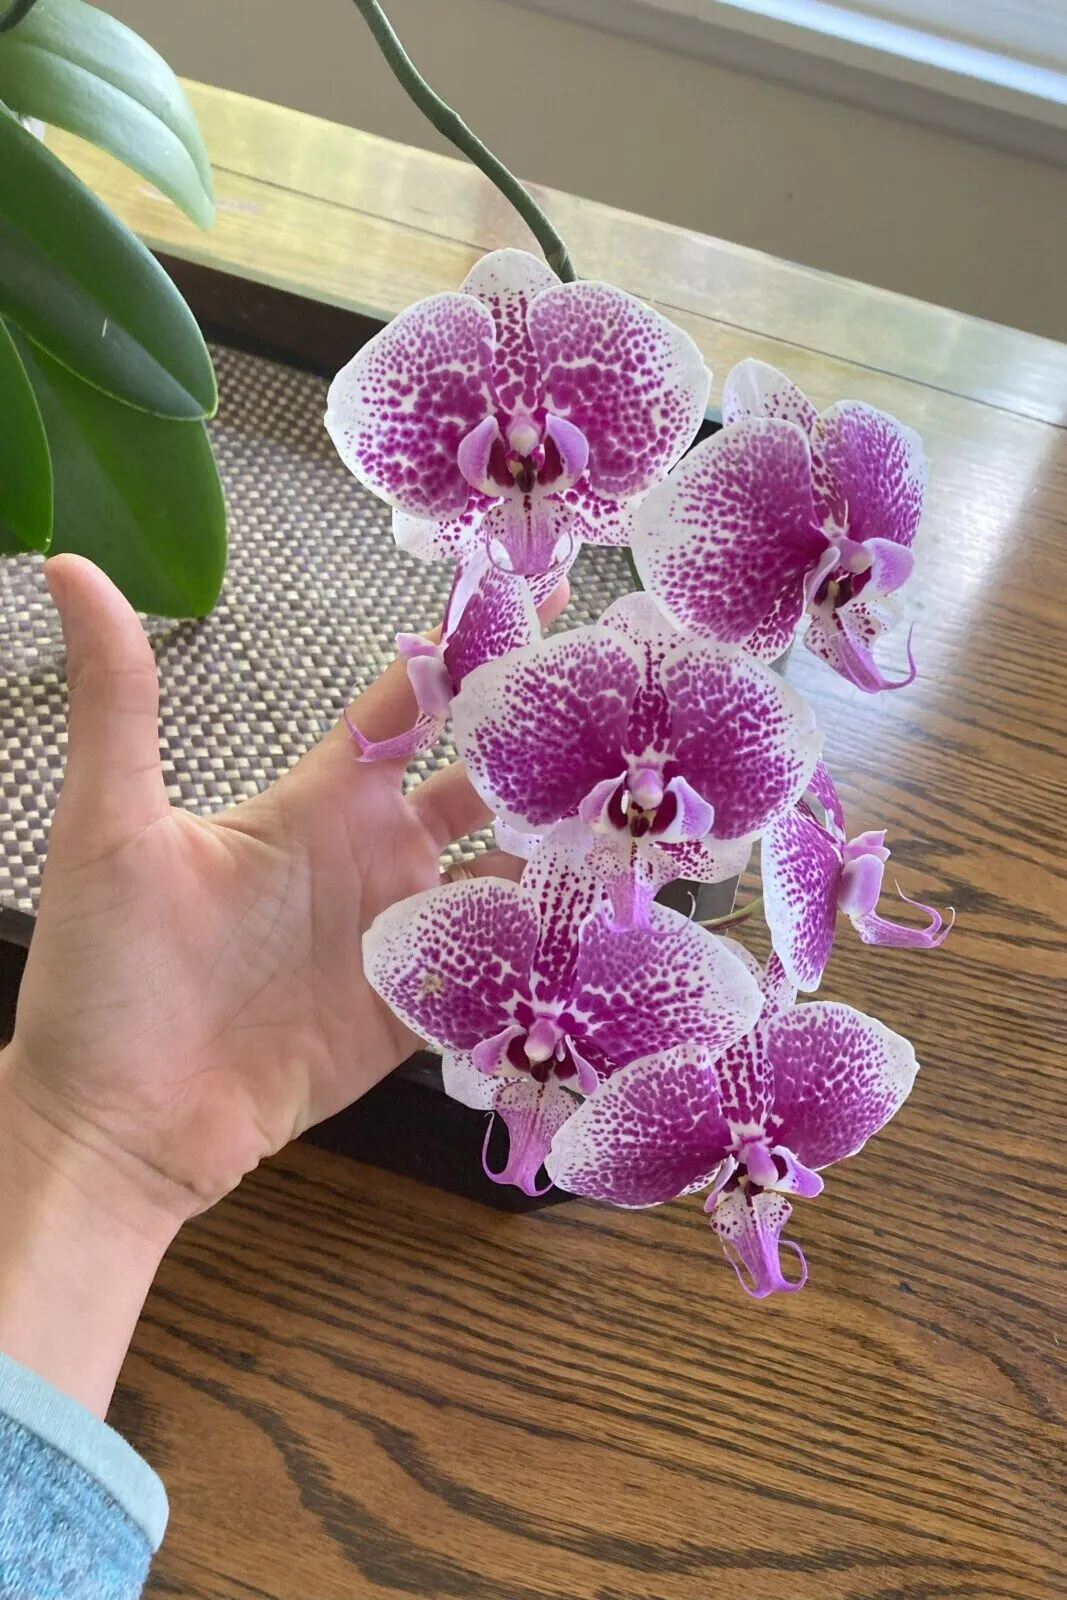 Woman's hand holding a phalaenopsis bloom.